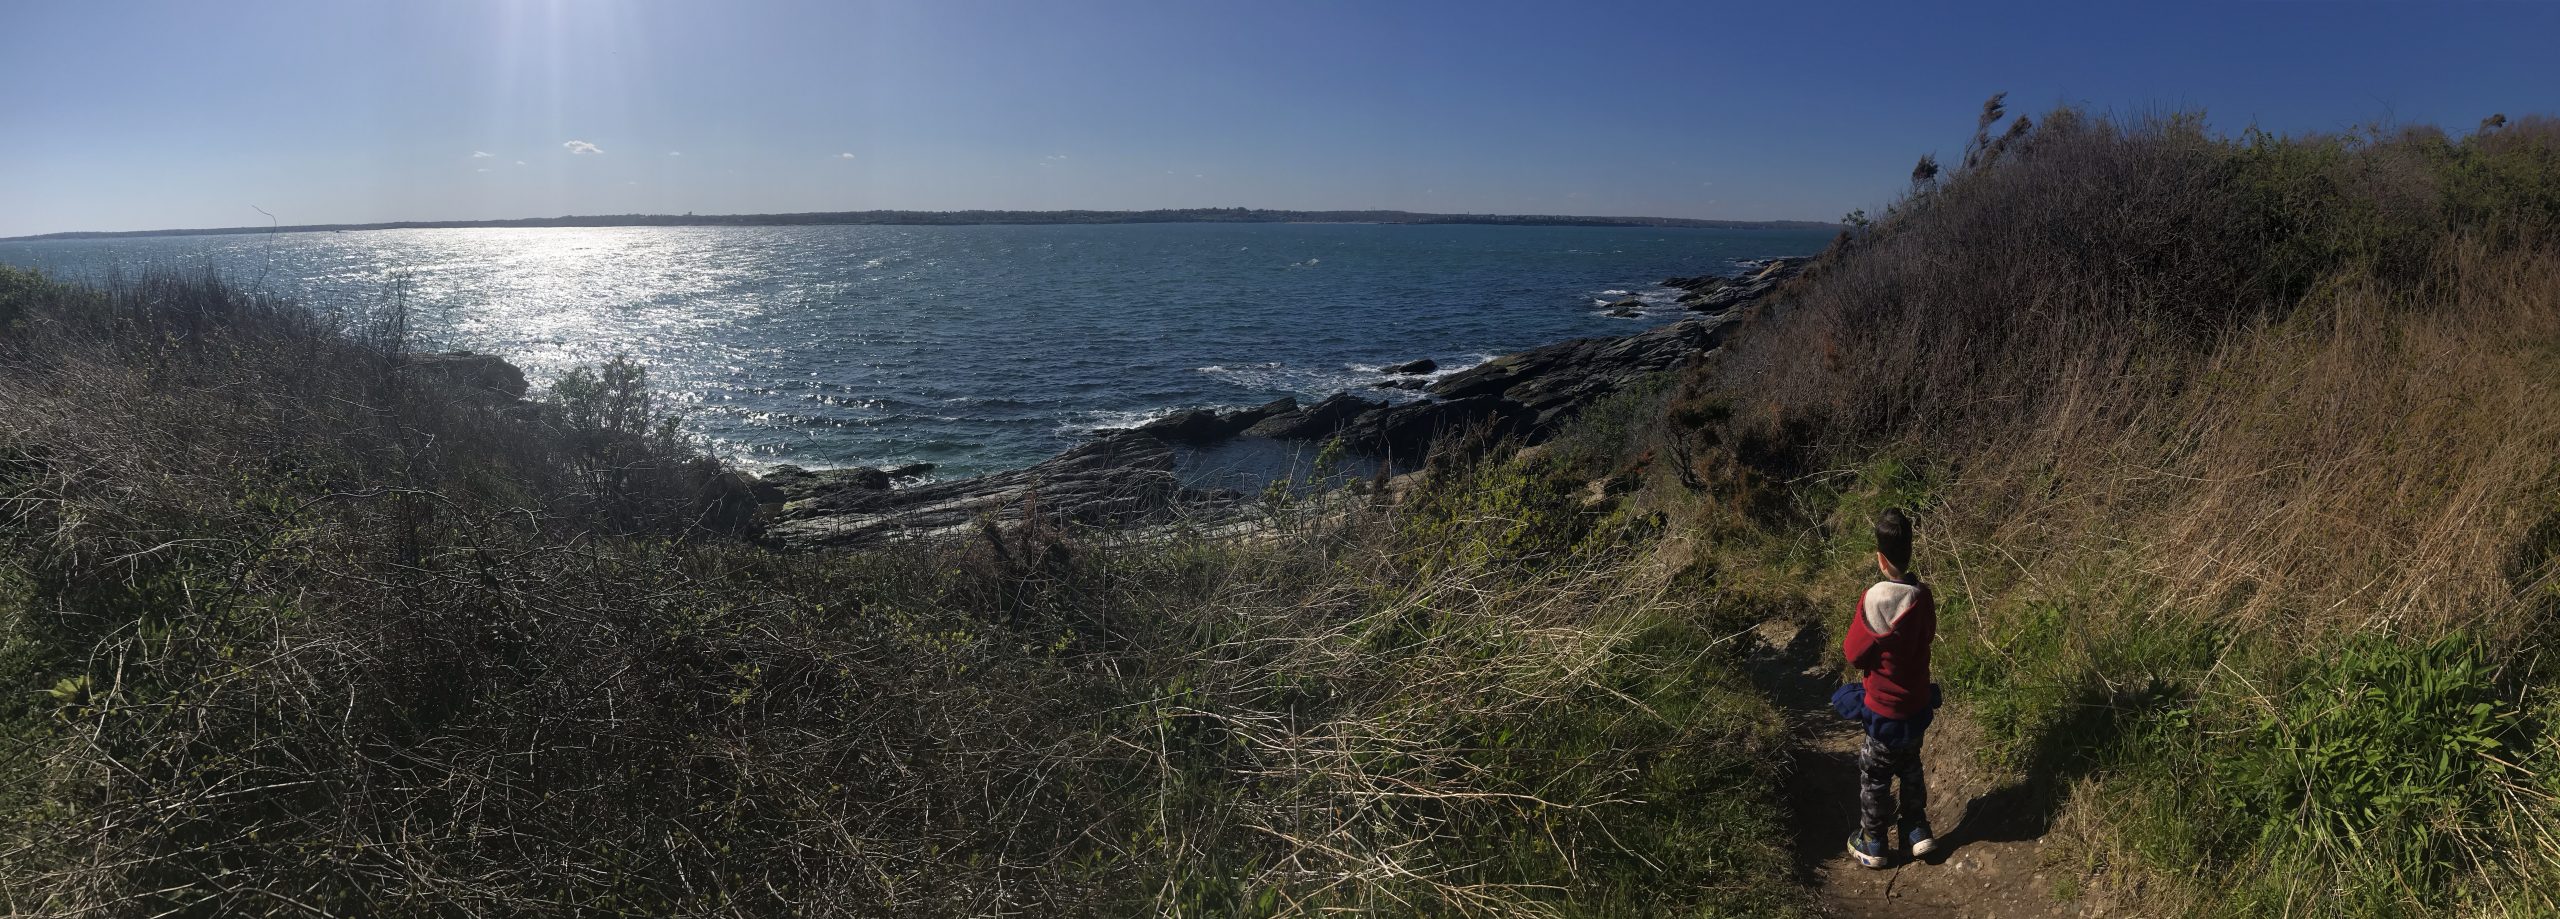 gorgeous Ocean view with rocky coastline at Beavertail Park in Jamestown